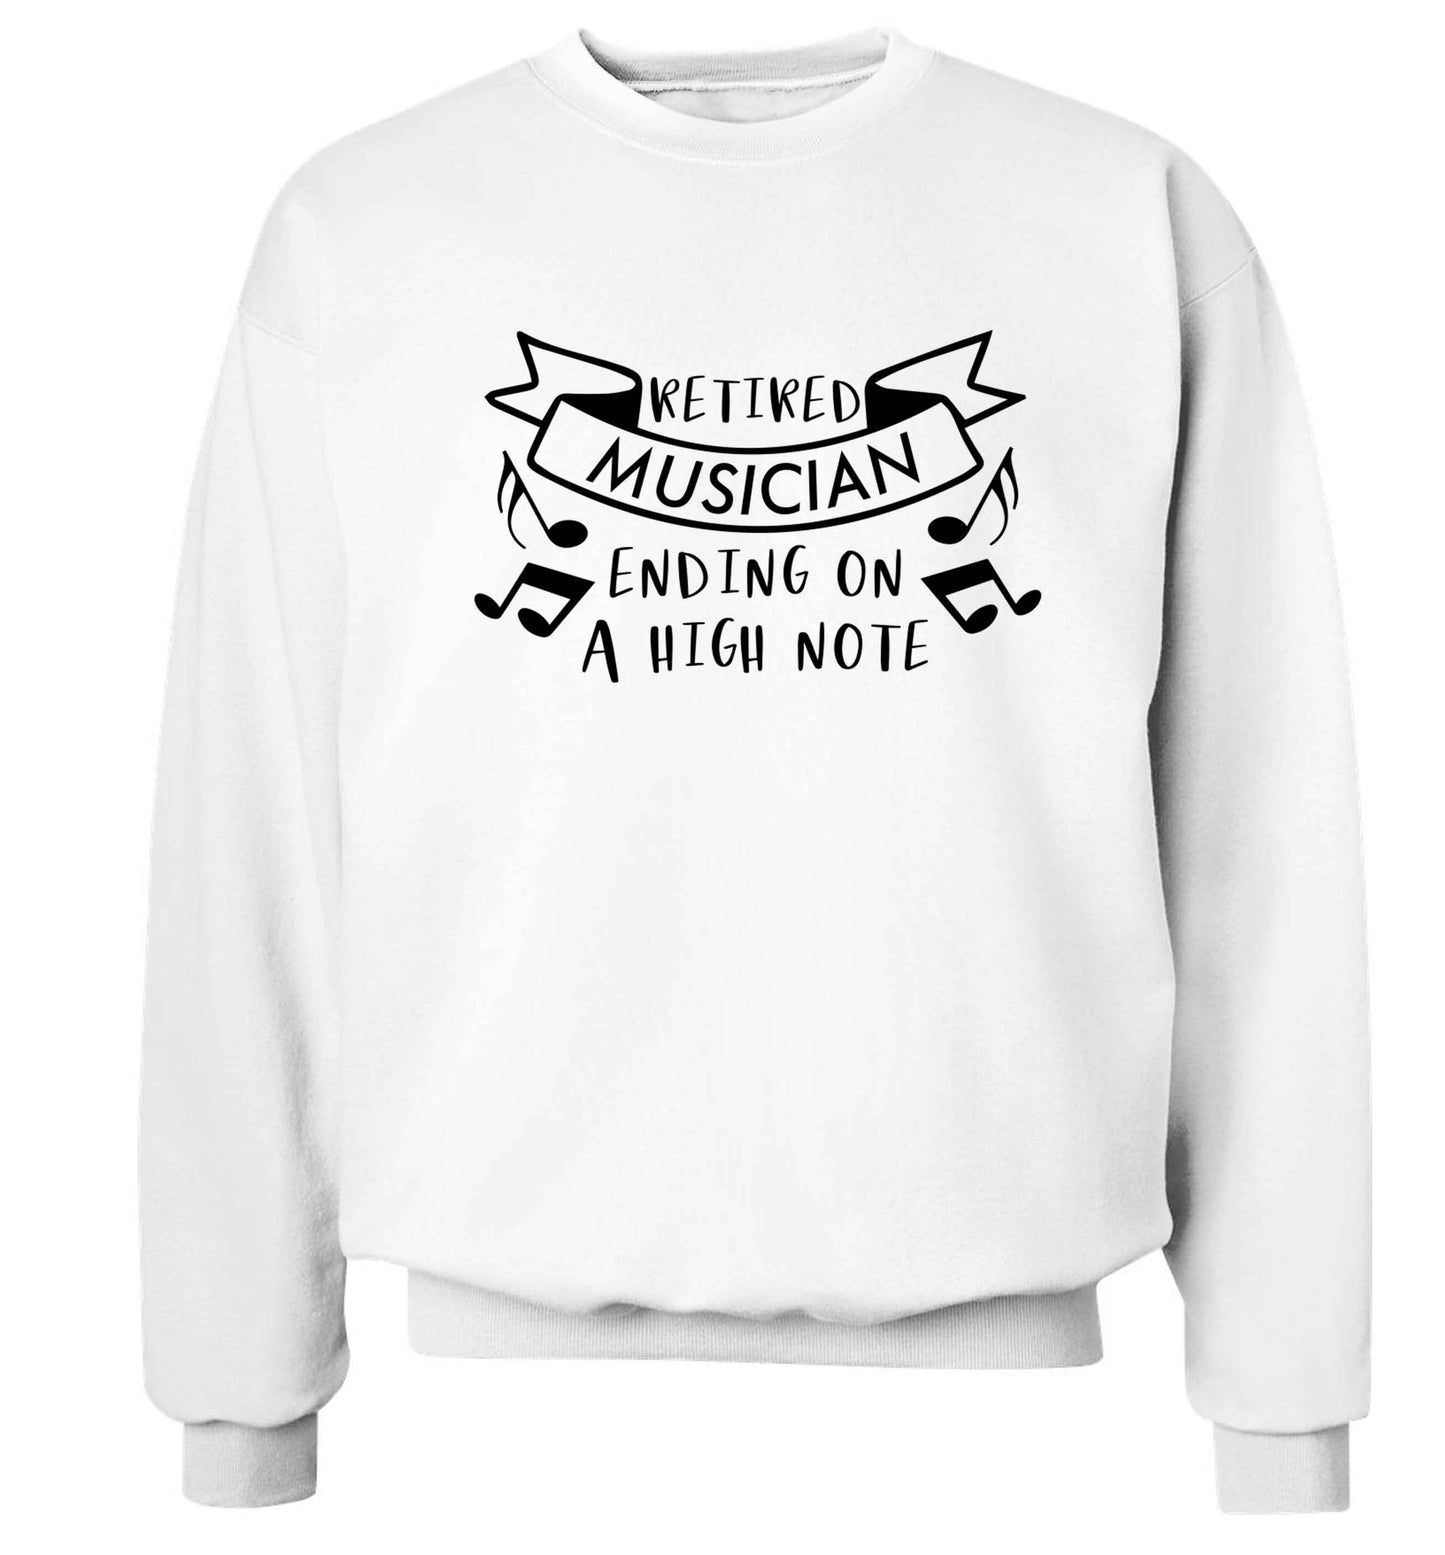 Retired musician ending on a high note Adult's unisex white Sweater 2XL